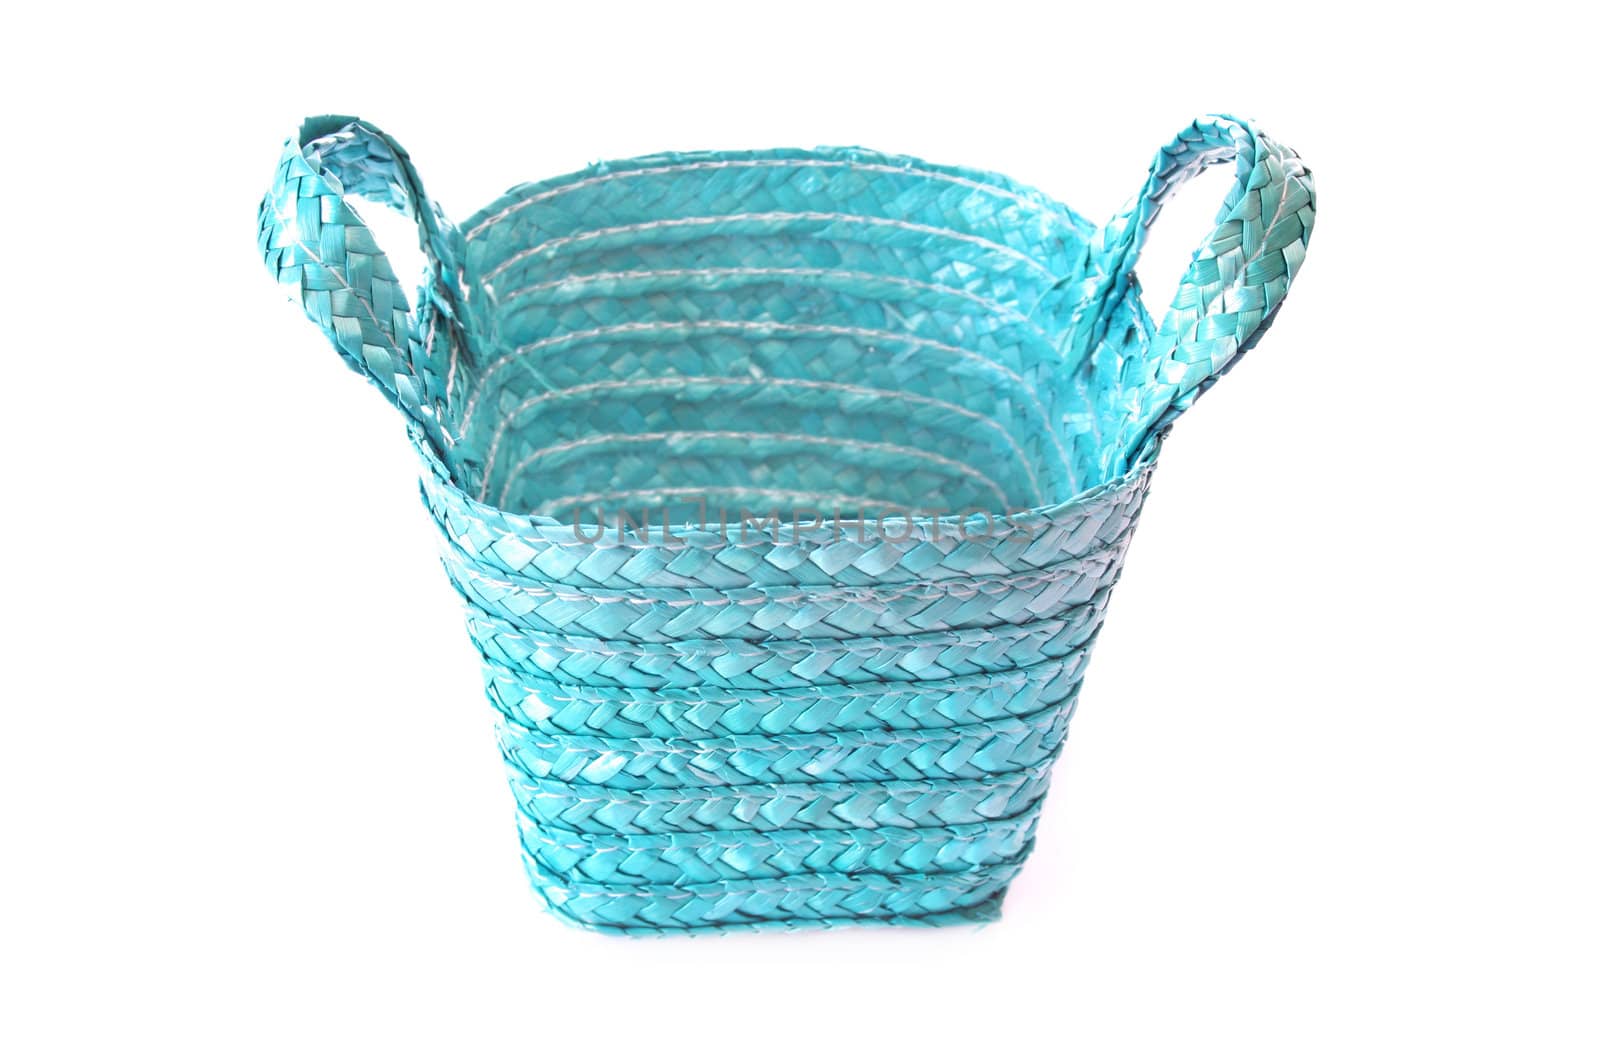 An empty basket of blue isolated on a white background.